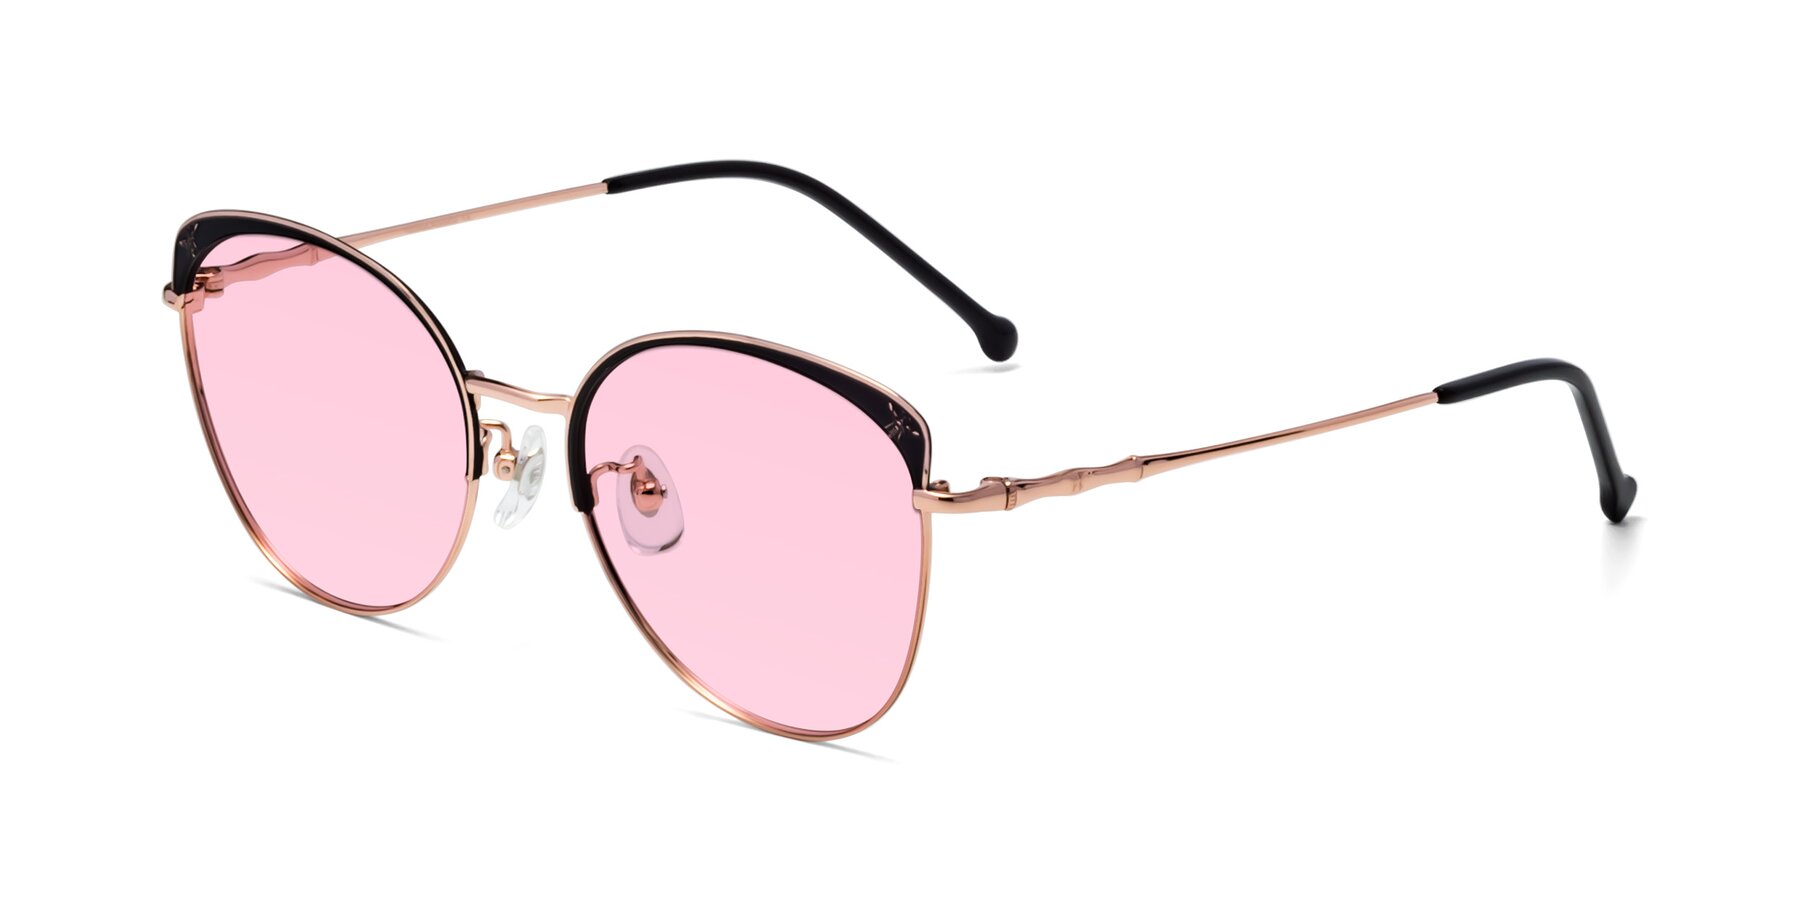 Angle of 18019 in Black-Rose Gold with Light Pink Tinted Lenses